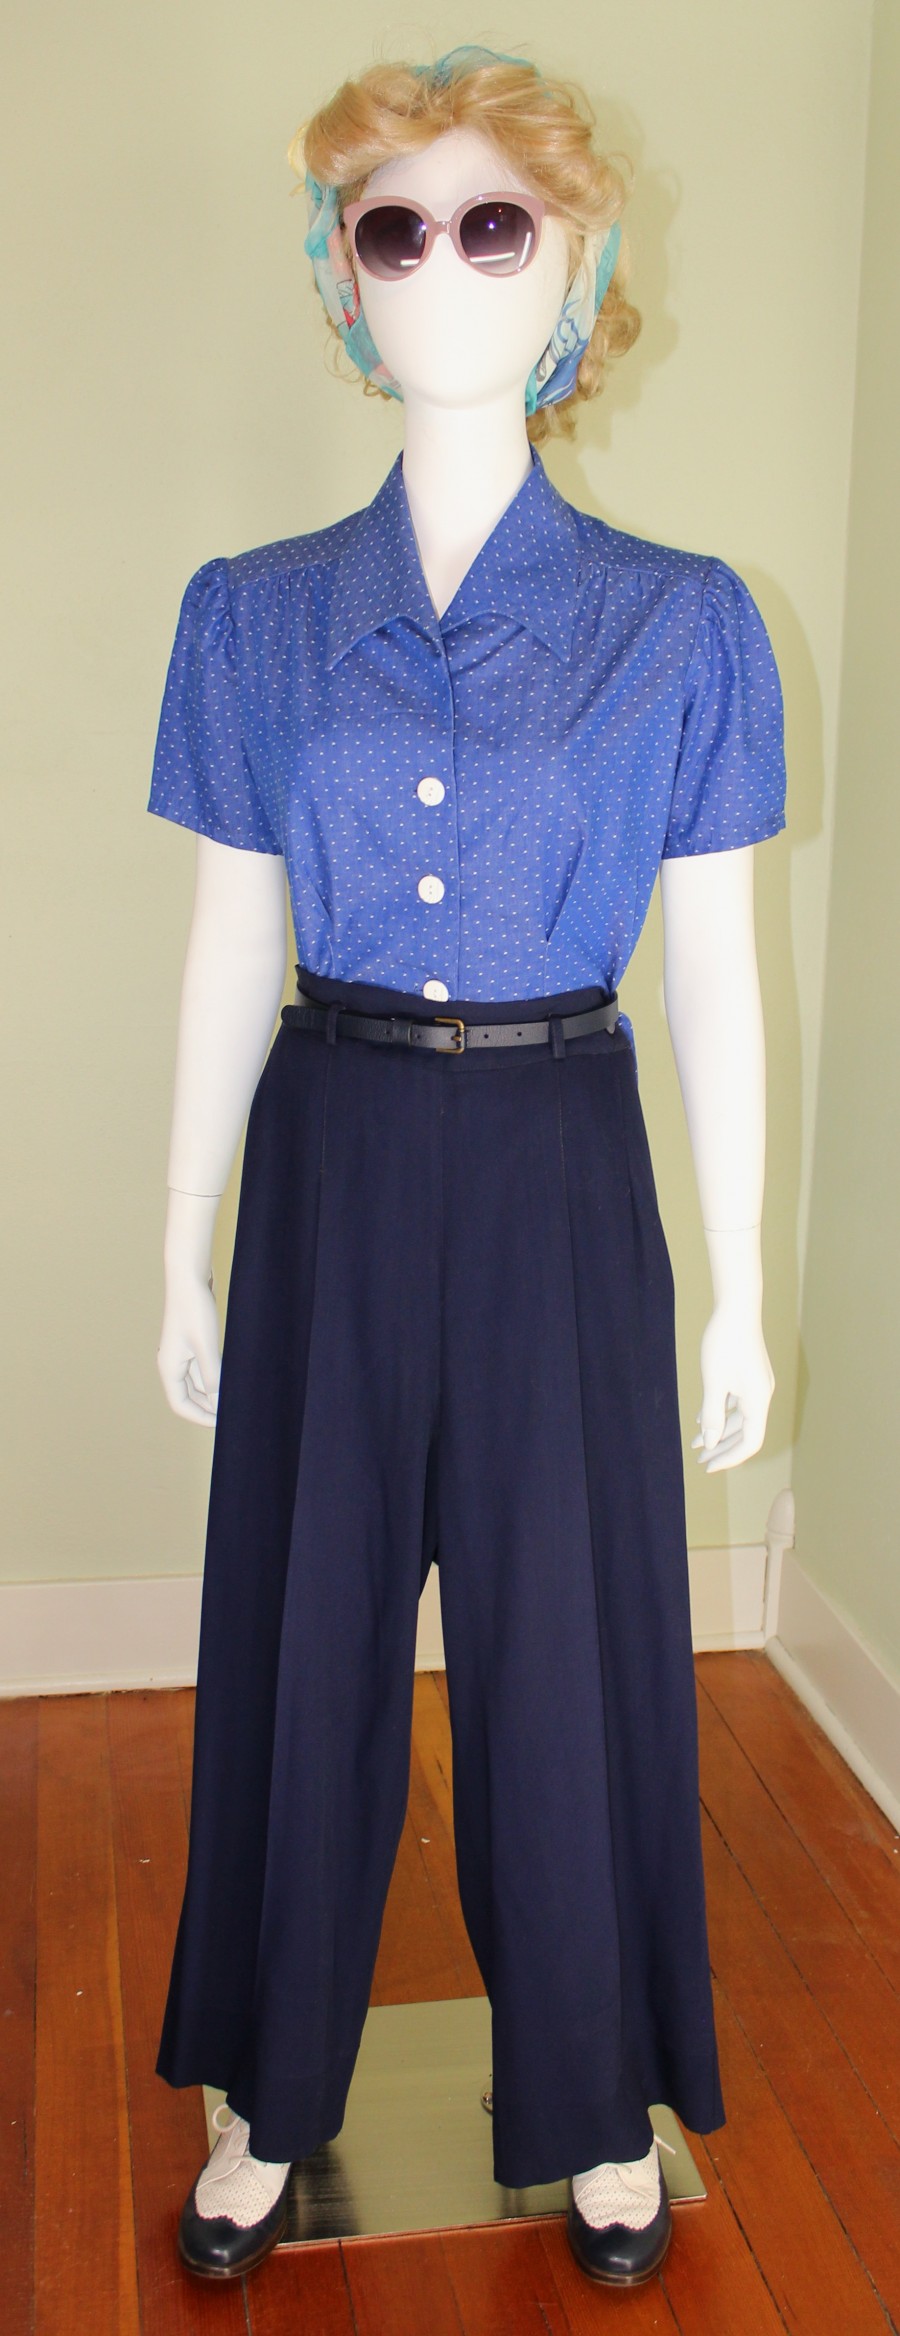 1940s Pants History- Trousers, Overalls, Jeans, Sailor, Siren Suits